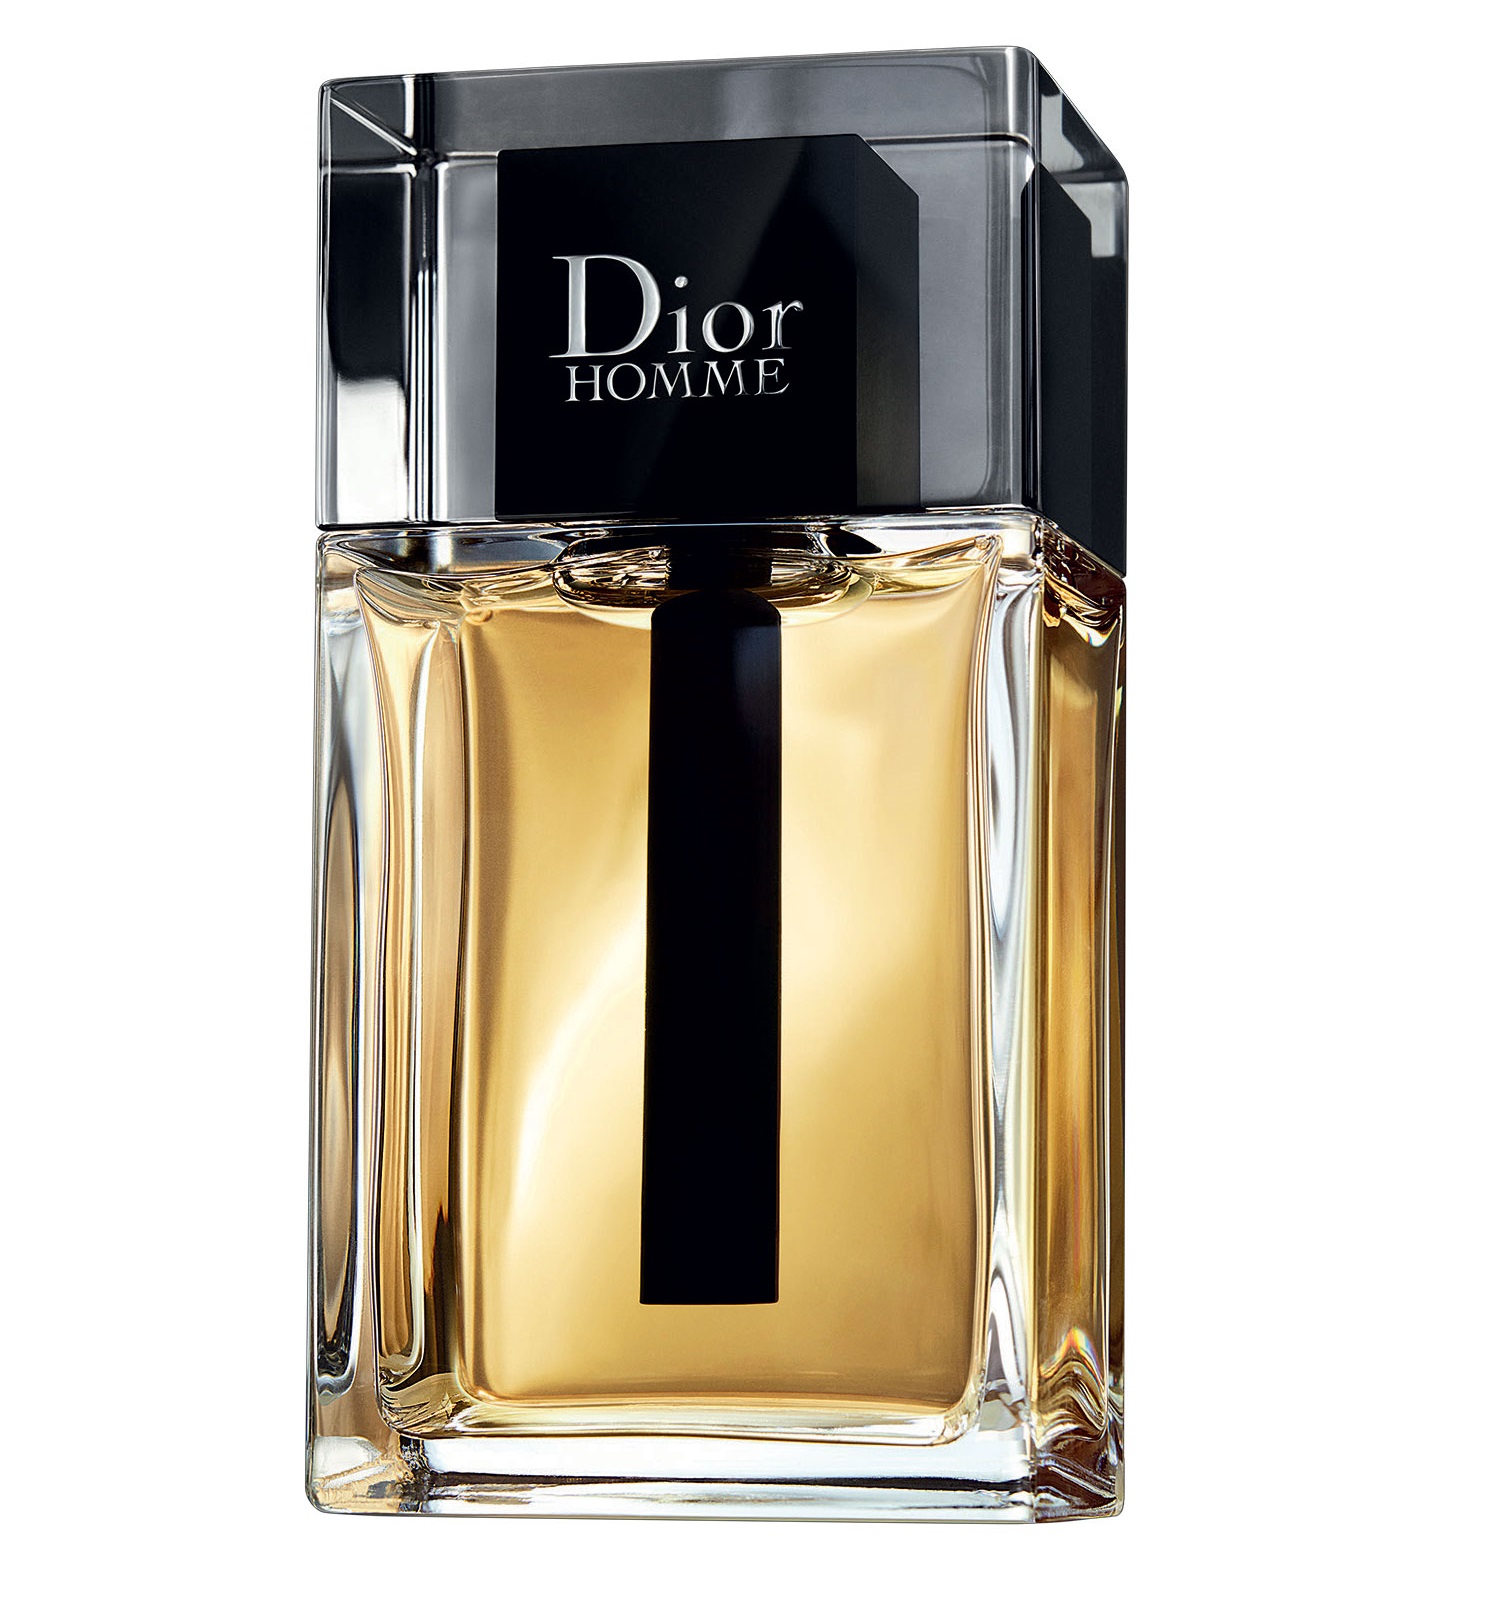 dior homme intense discontinued